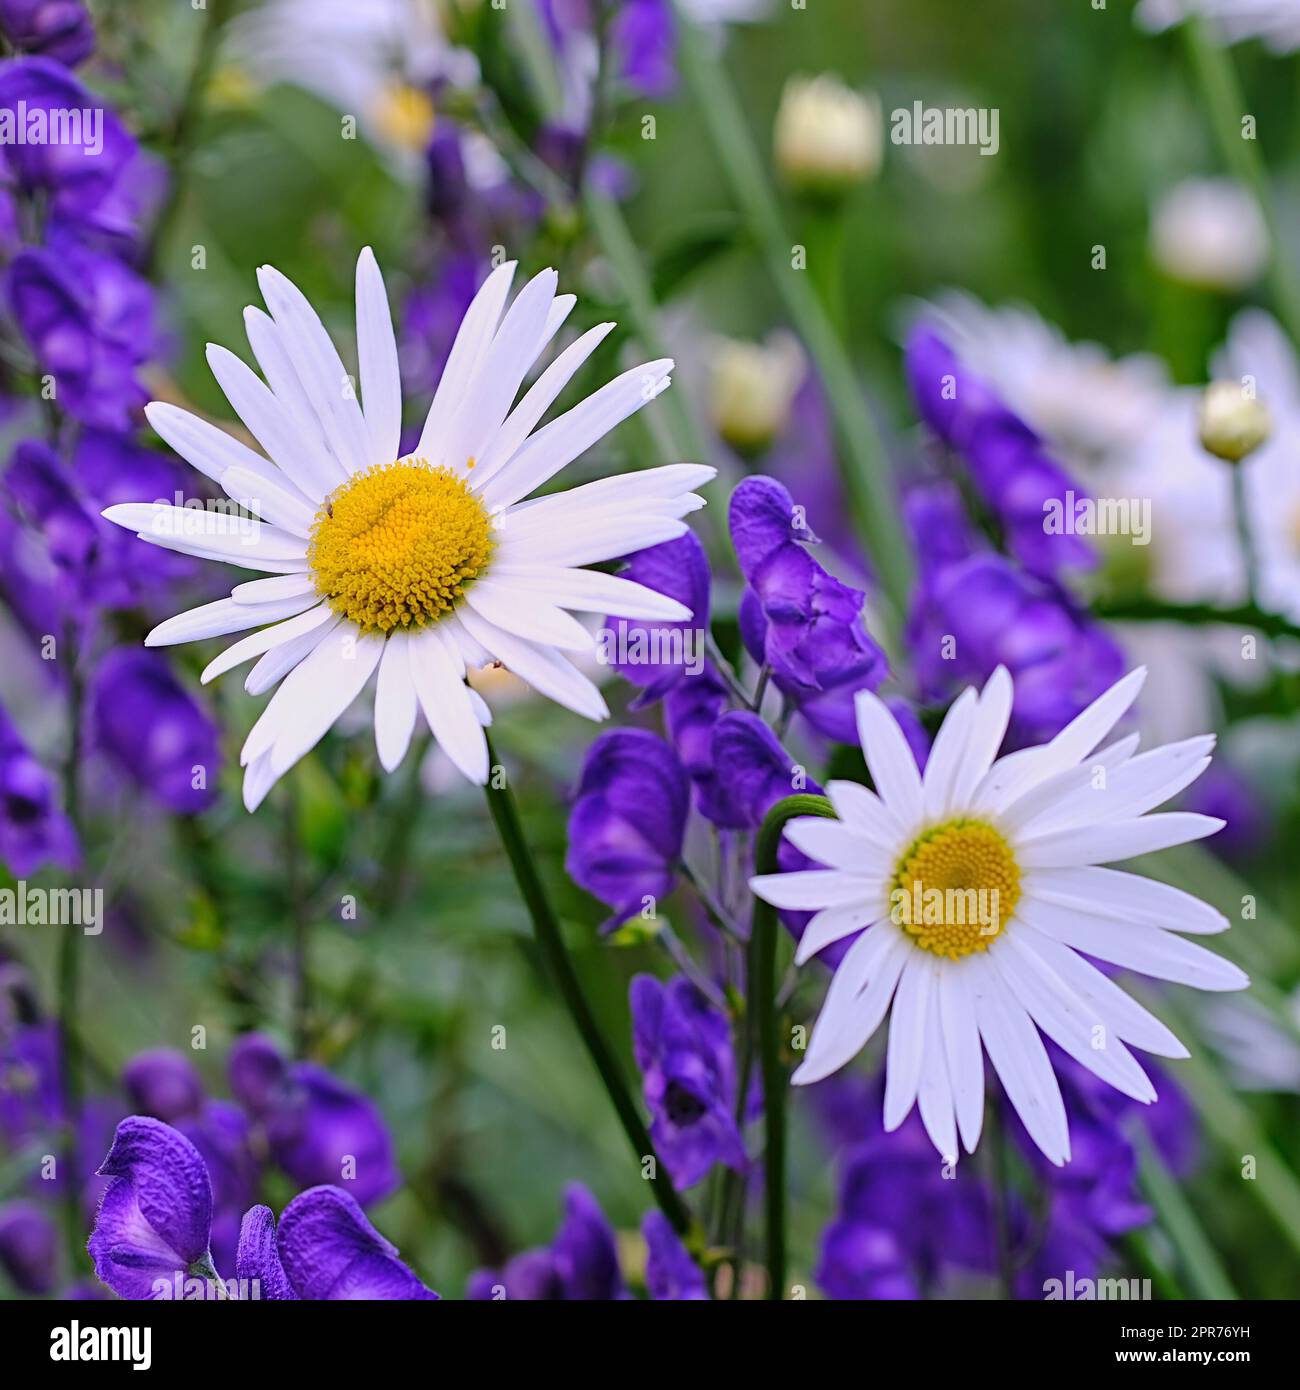 Top view of daisy flowers growing in green meadow among purple flora. Marguerite perennial flowering plants on a grassy field in spring from above. Beautiful white flowers blooming in backyard garden Stock Photo